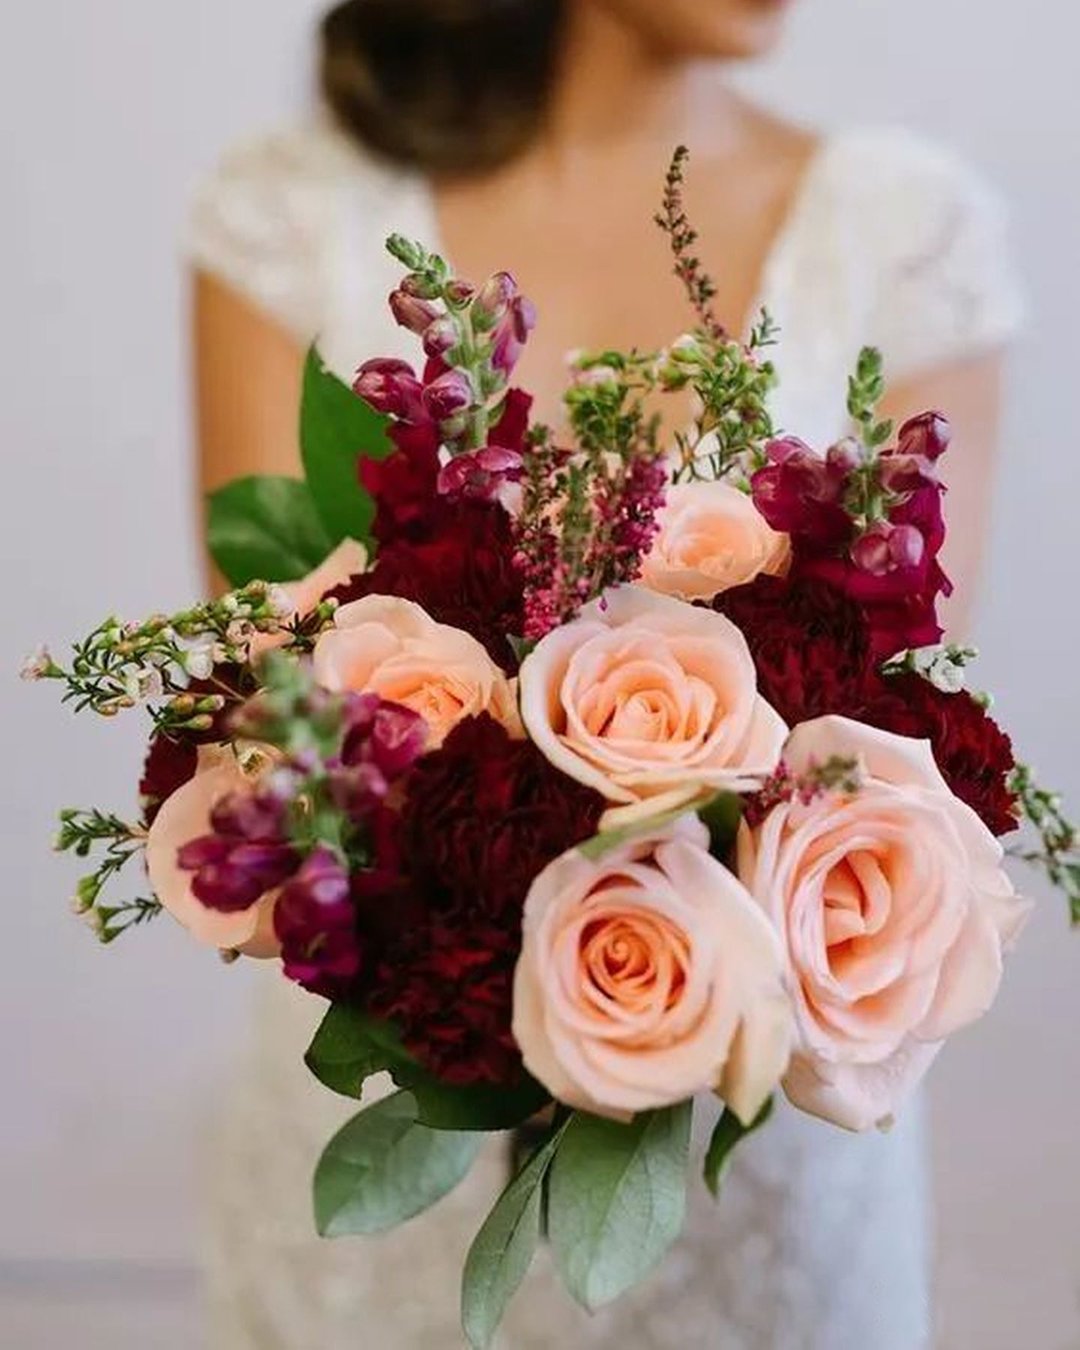 wedding bouquet ideas inspiration with rose gold roses and marsala flowers greenautumn photography film 2